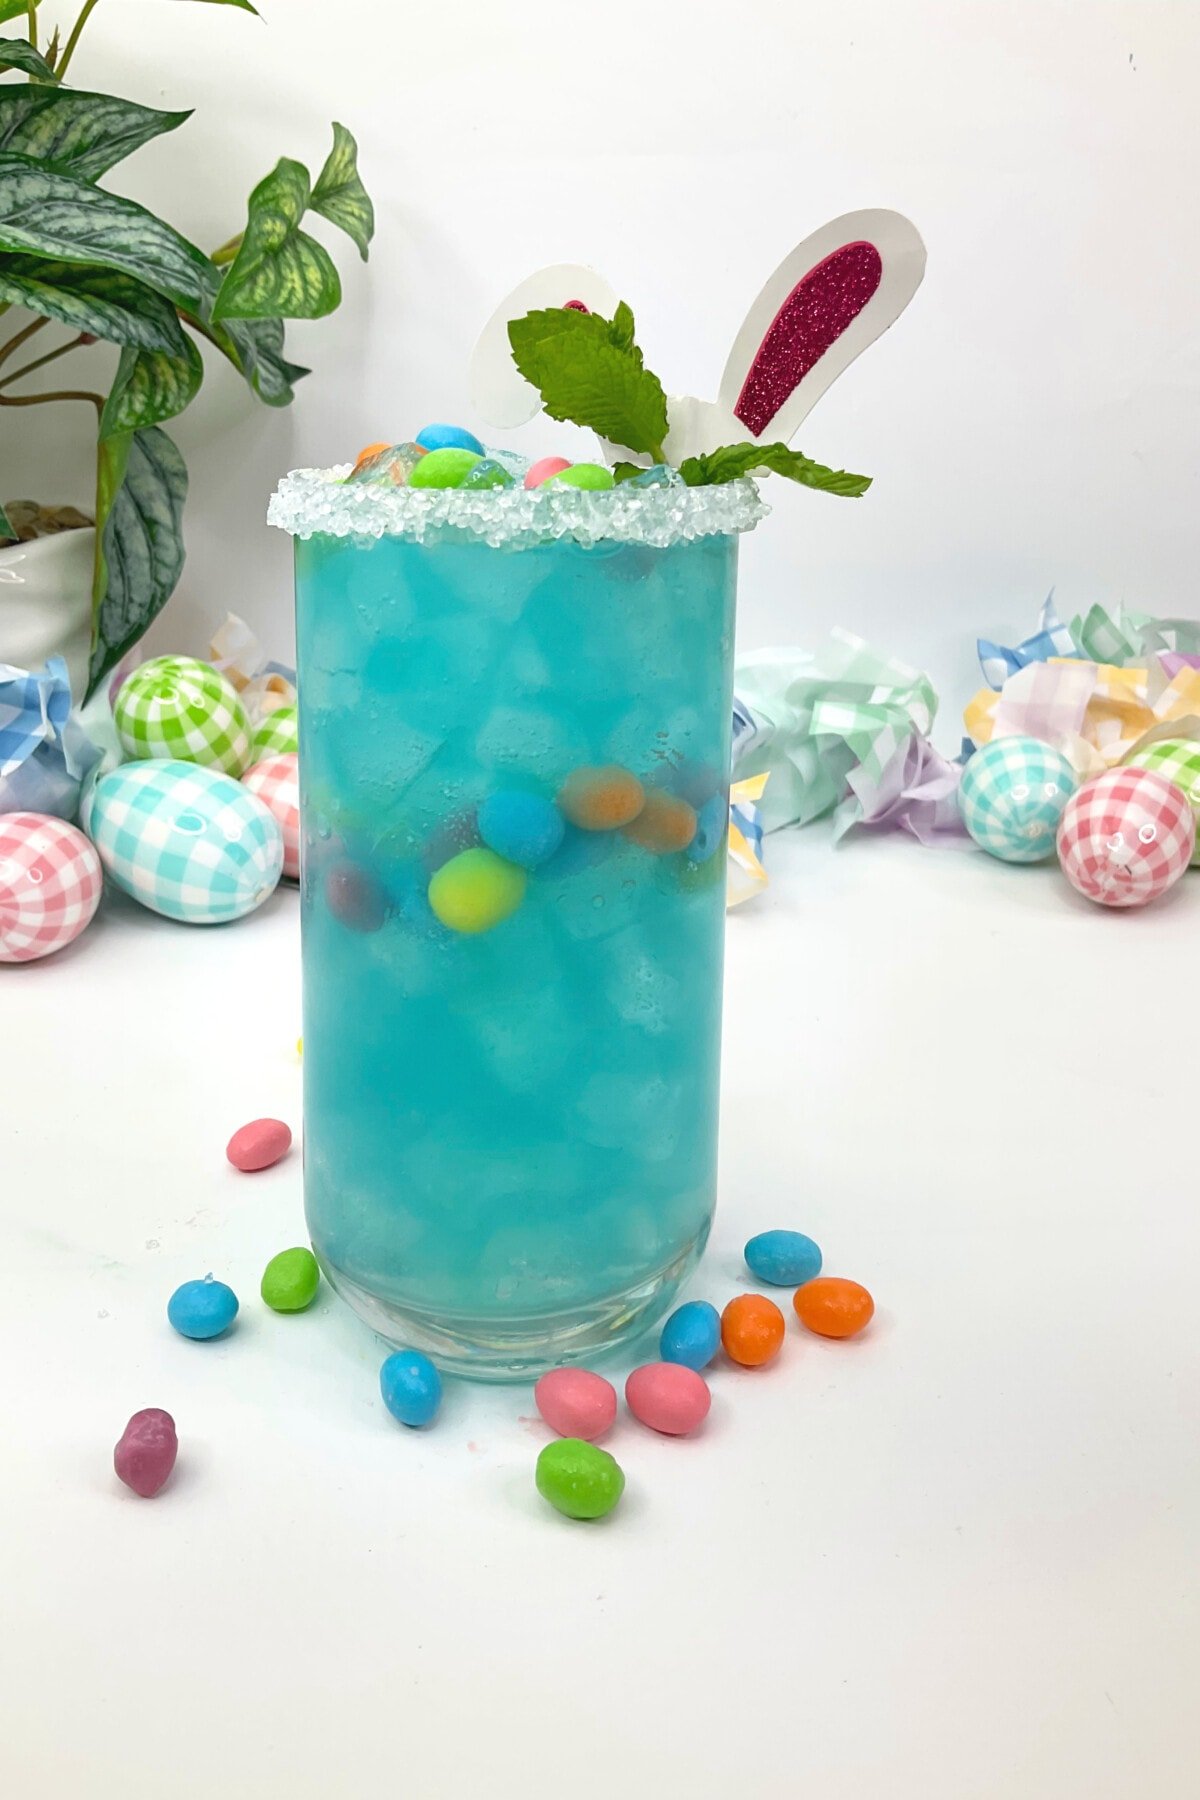 The drink with bunny ear topper.